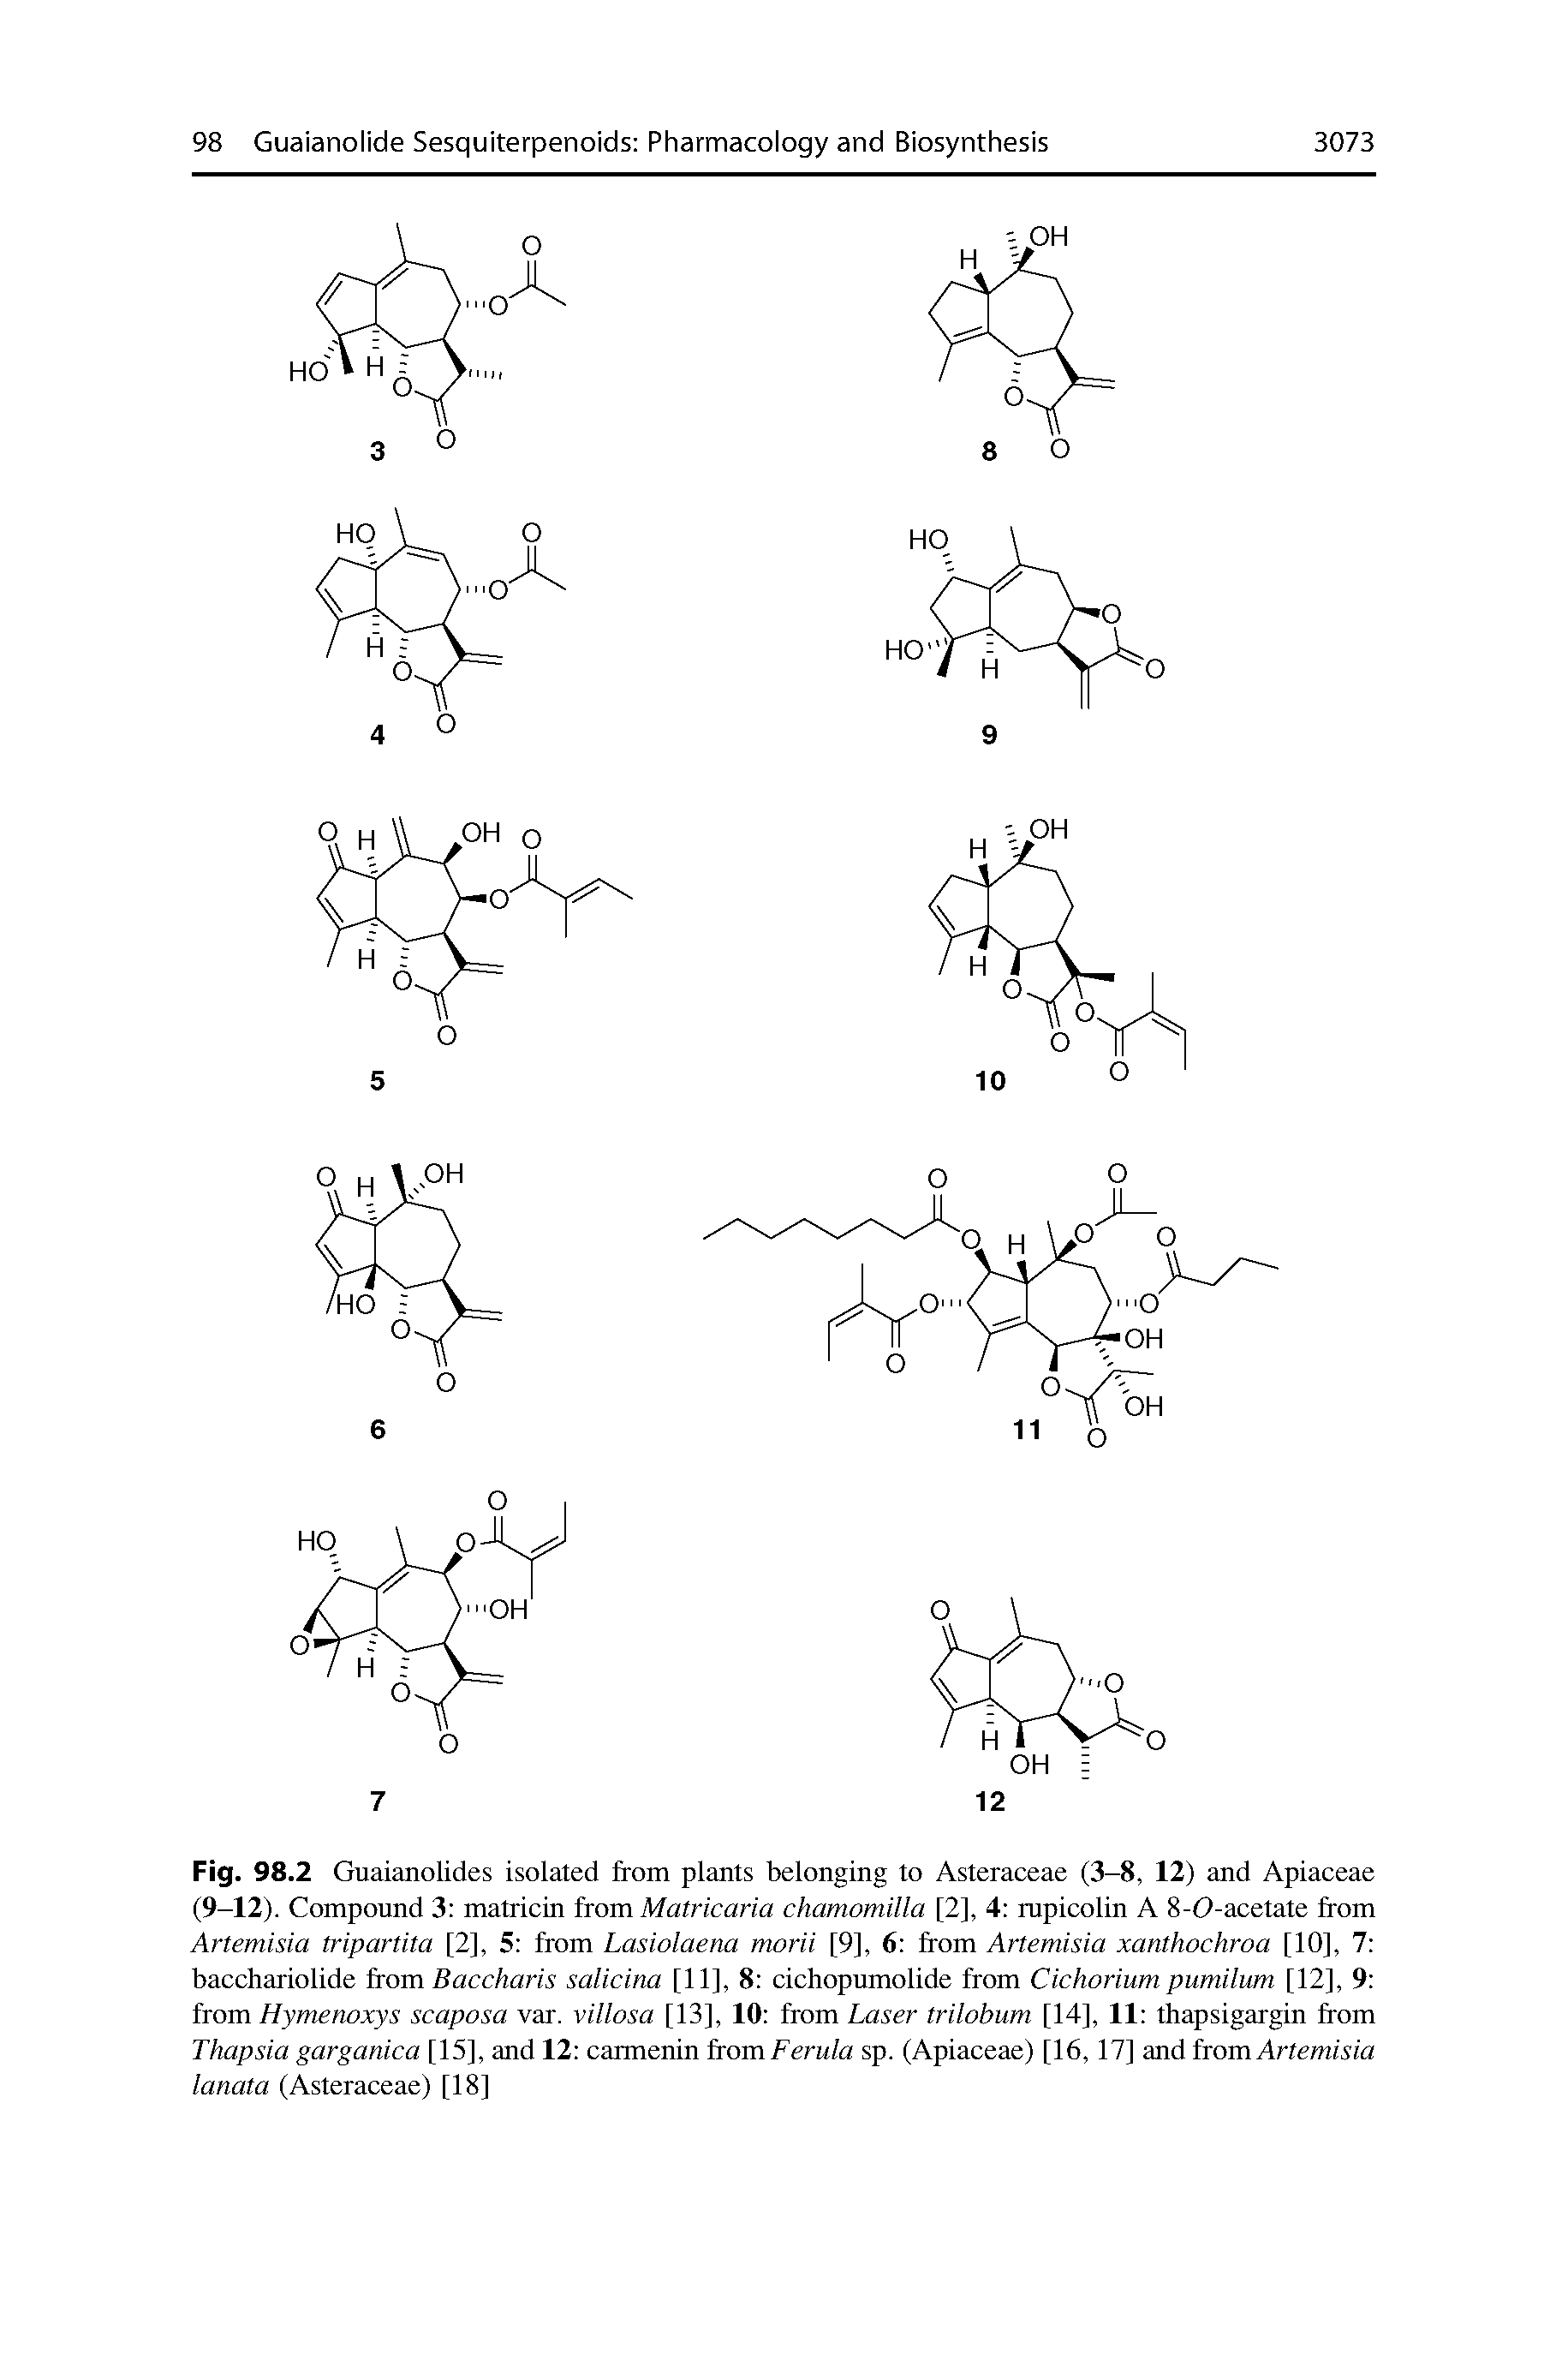 Fig. 98.2 Guaianolides isolated from plants belonging to Asteraceae (3-8, 12) and Apiaceae (9-12). Compound 3 matricin fmm Matricaria chamomilla [2], 4 mpicolin A 8-0-acetate from Artemisia tripartita [2], 5 from Lasiolaena morii [9], 6 from Artemisia xanthochroa [10], 7 bacchariolide from Baccharis salicina [11], 8 cichopumolide from Cichorium pumilum [12], 9 from Hymenoxys scaposa var. villosa [13], 10 from Laser trilobum [14], 11 thapsigargin from Thapsia garganica [15], and 12 carmenin fromFerula sp. (Apiaceae) [16, 17] and from Artemisia lanata (Asteraceae) [18]...